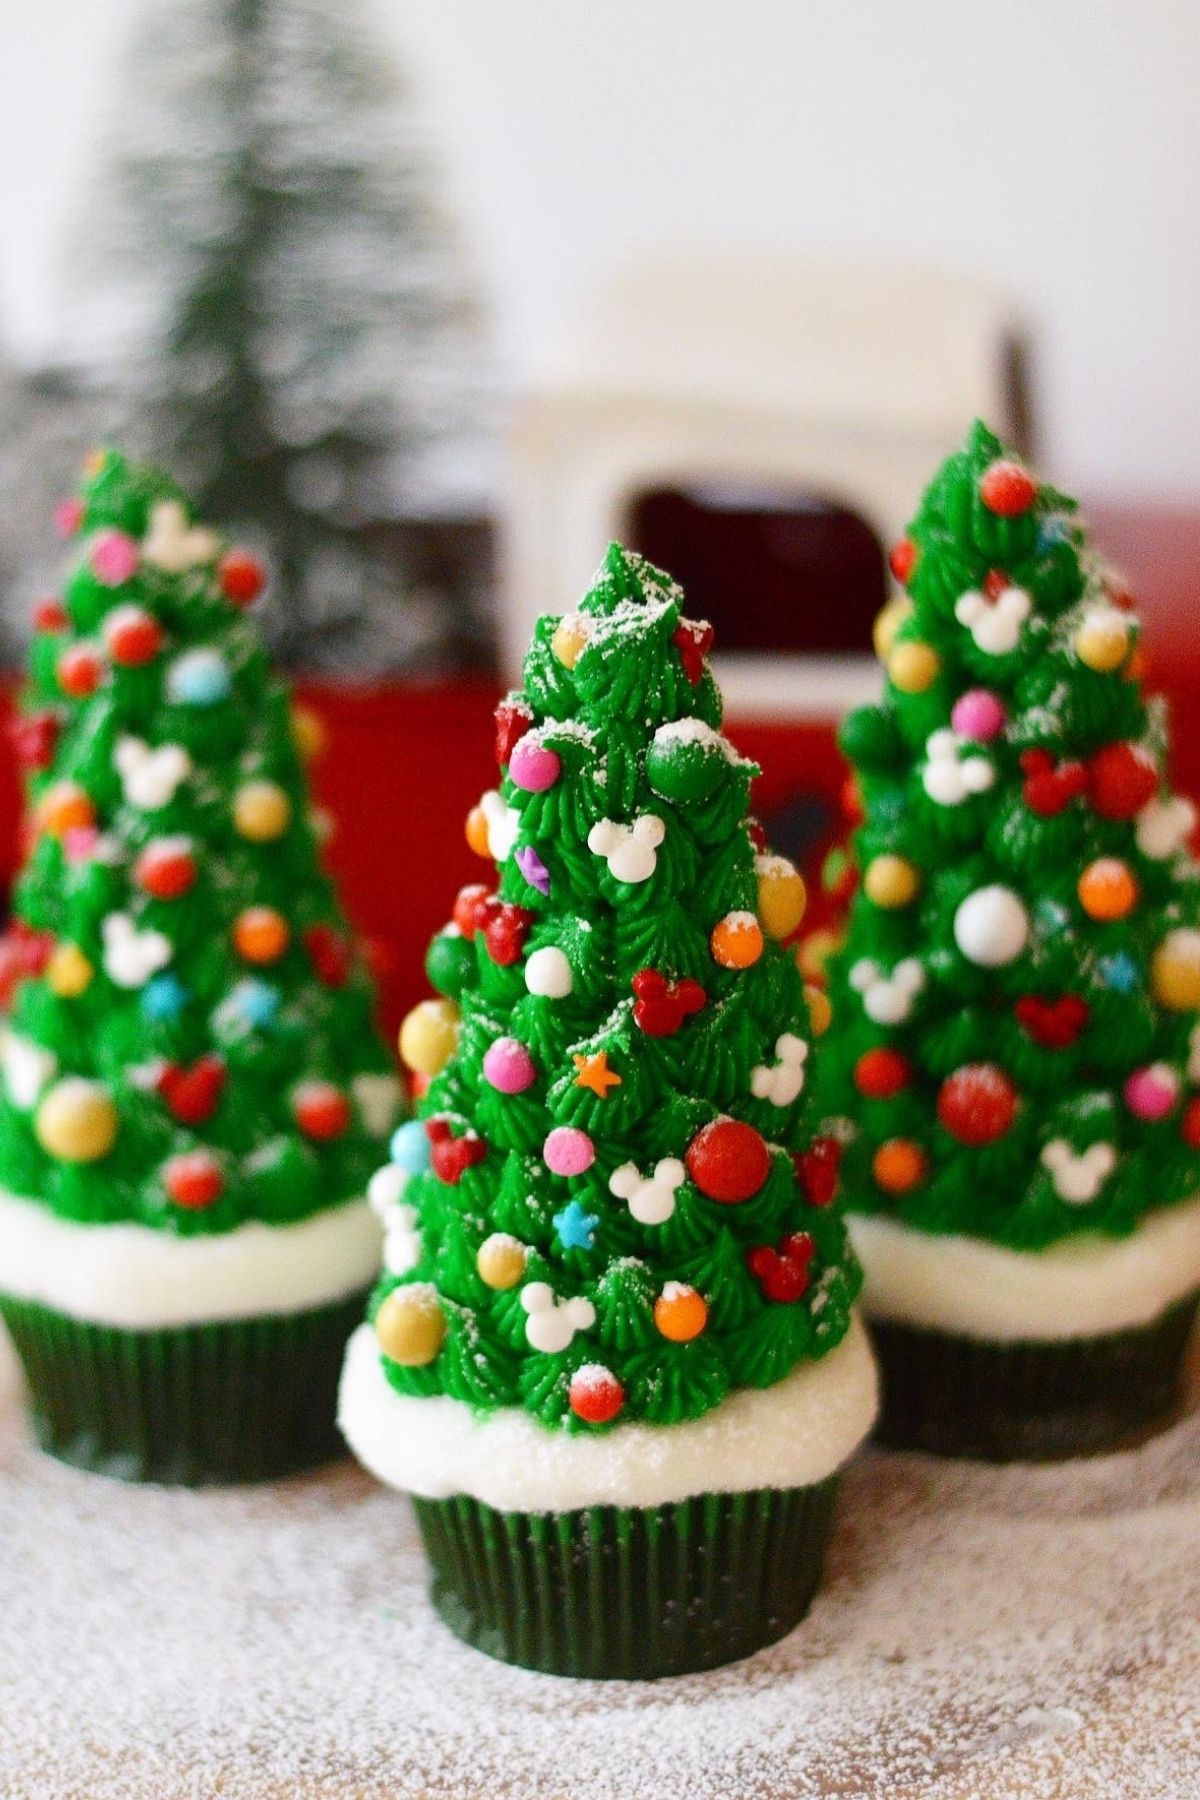 These Christmas tree cupcakes are filled with Disney's Grey Stuff and topped with a beautiful decorated Mickey shaped ice cream cone tree.  